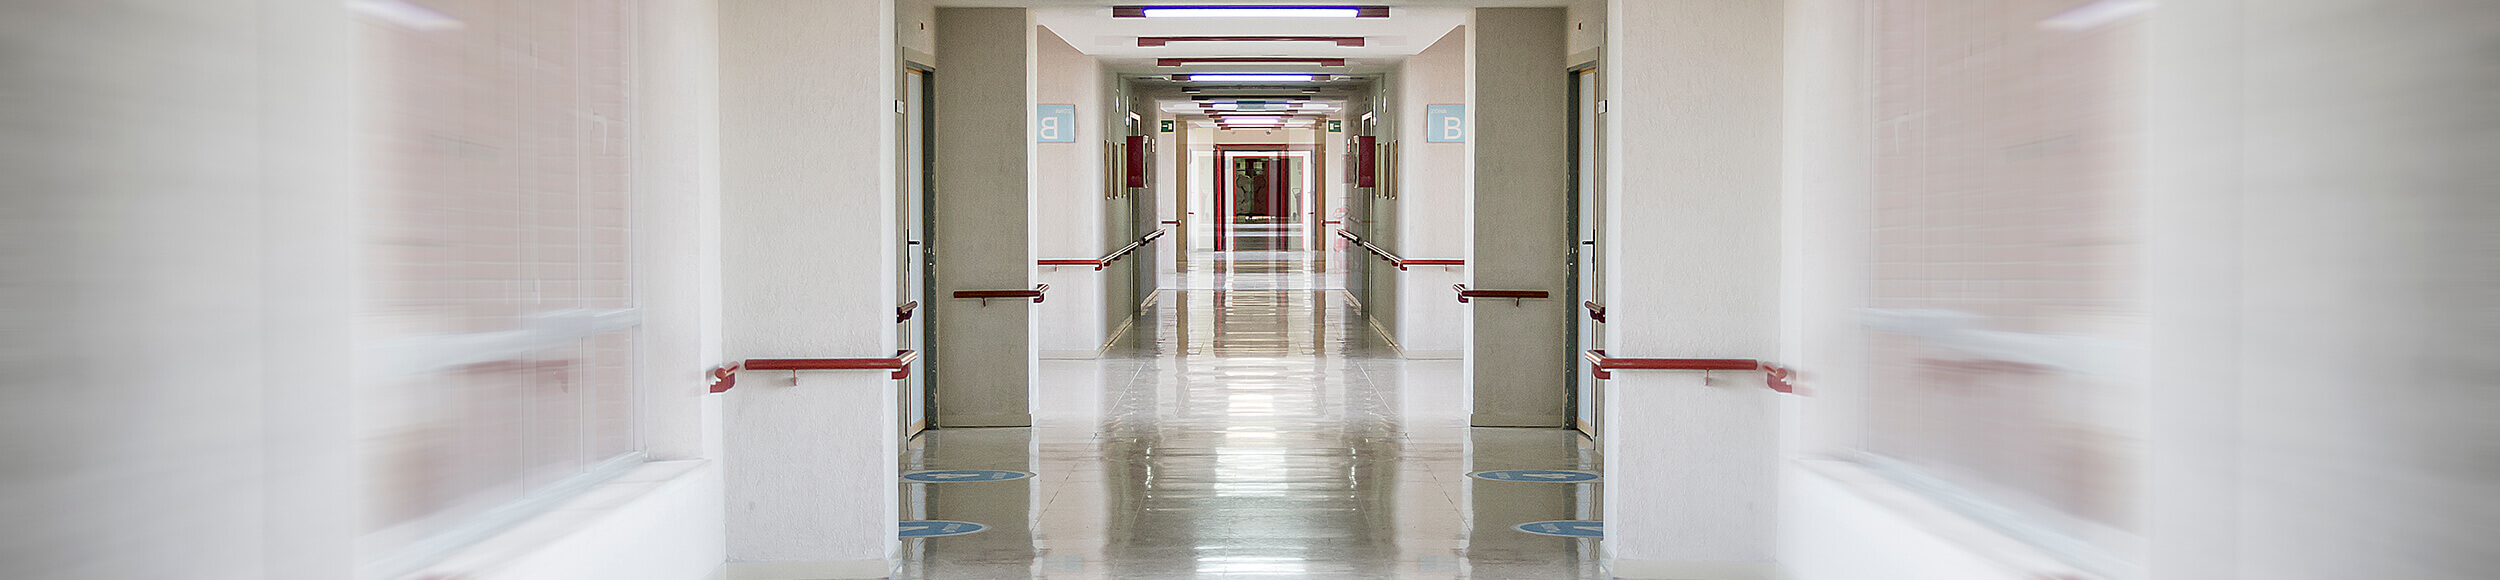 hospital hallway to represent slip and fall cases we undertake